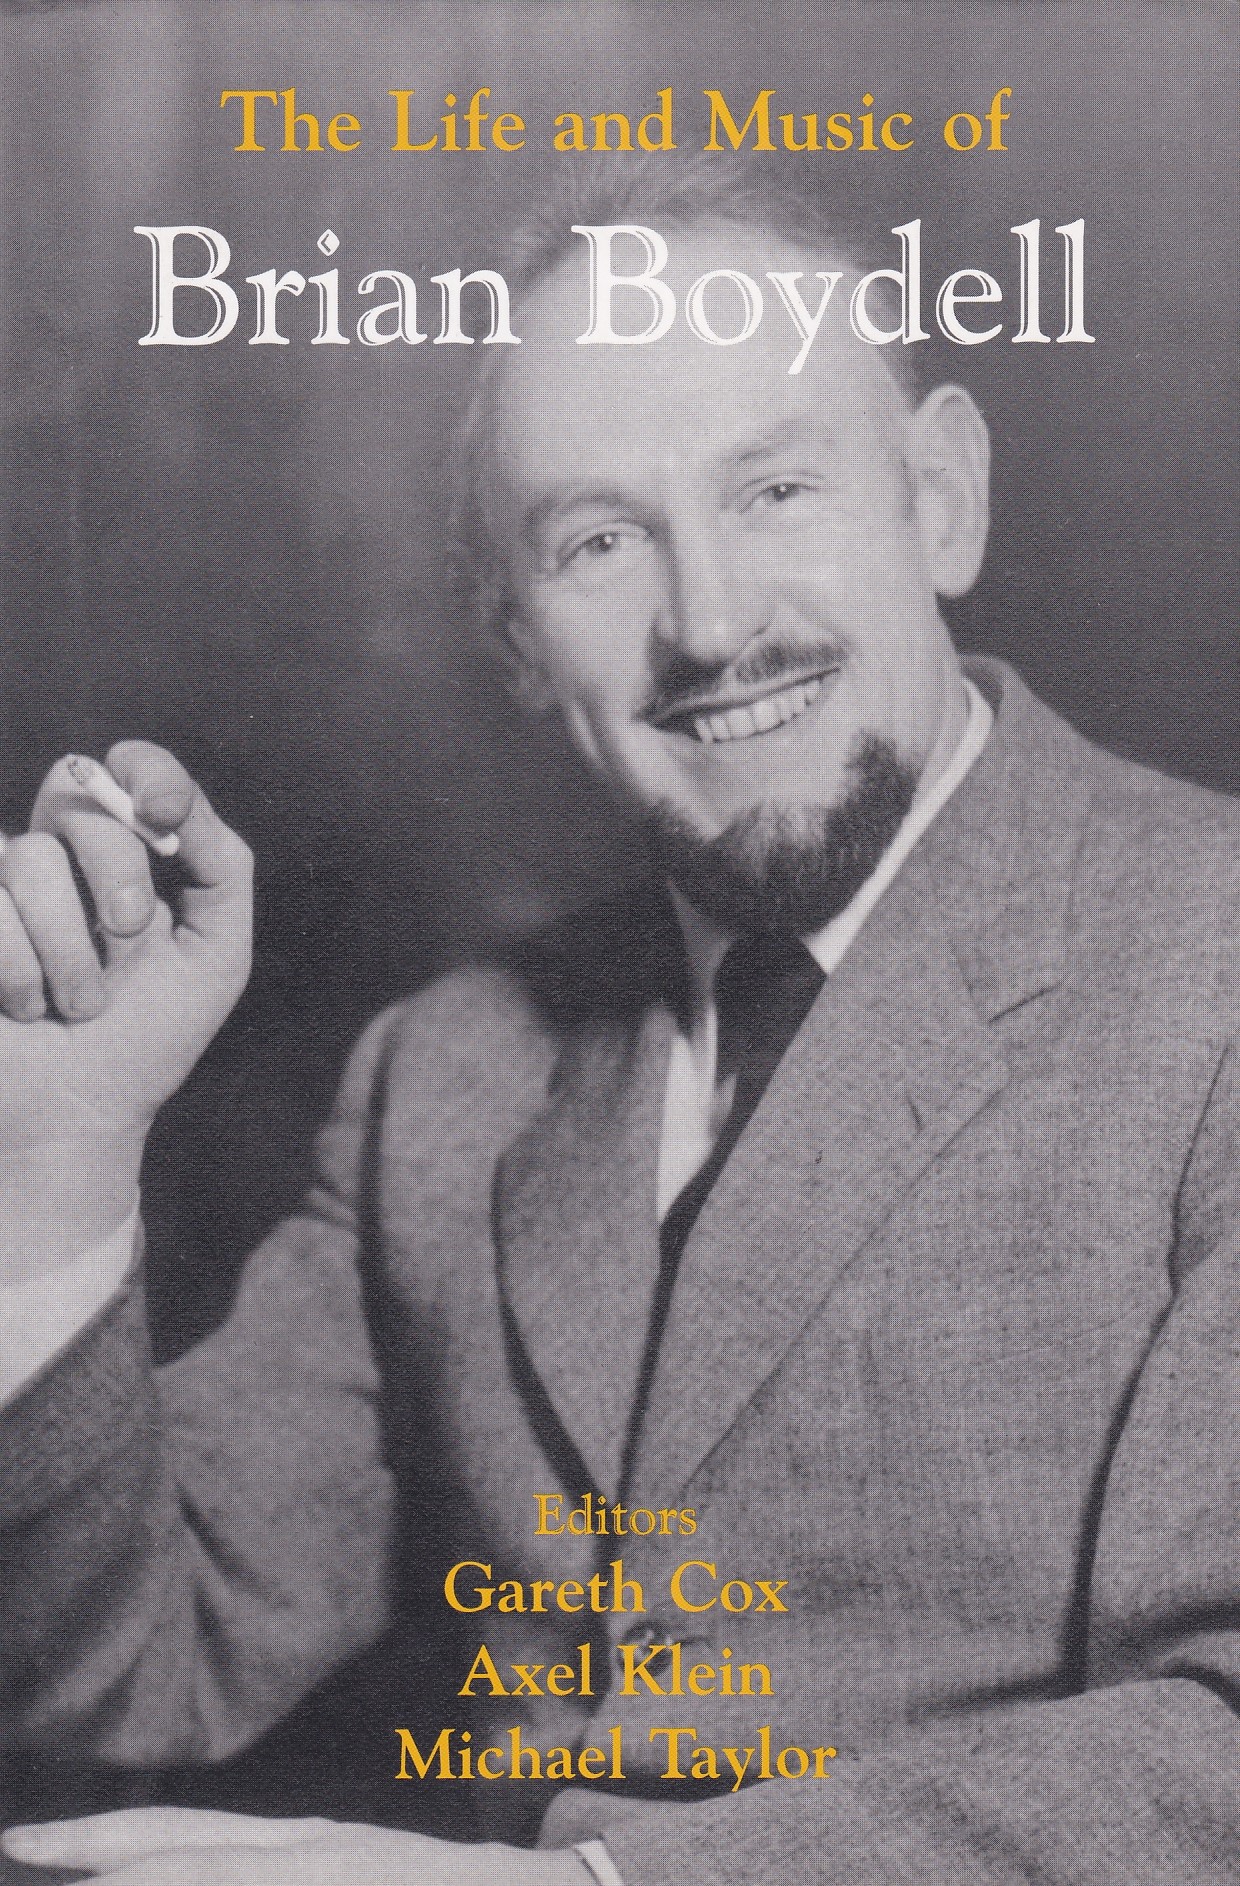 The Life and Music of Brian Boydell | Edited by Gareth Cox, Axel Klein & Michael Taylor | Charlie Byrne's